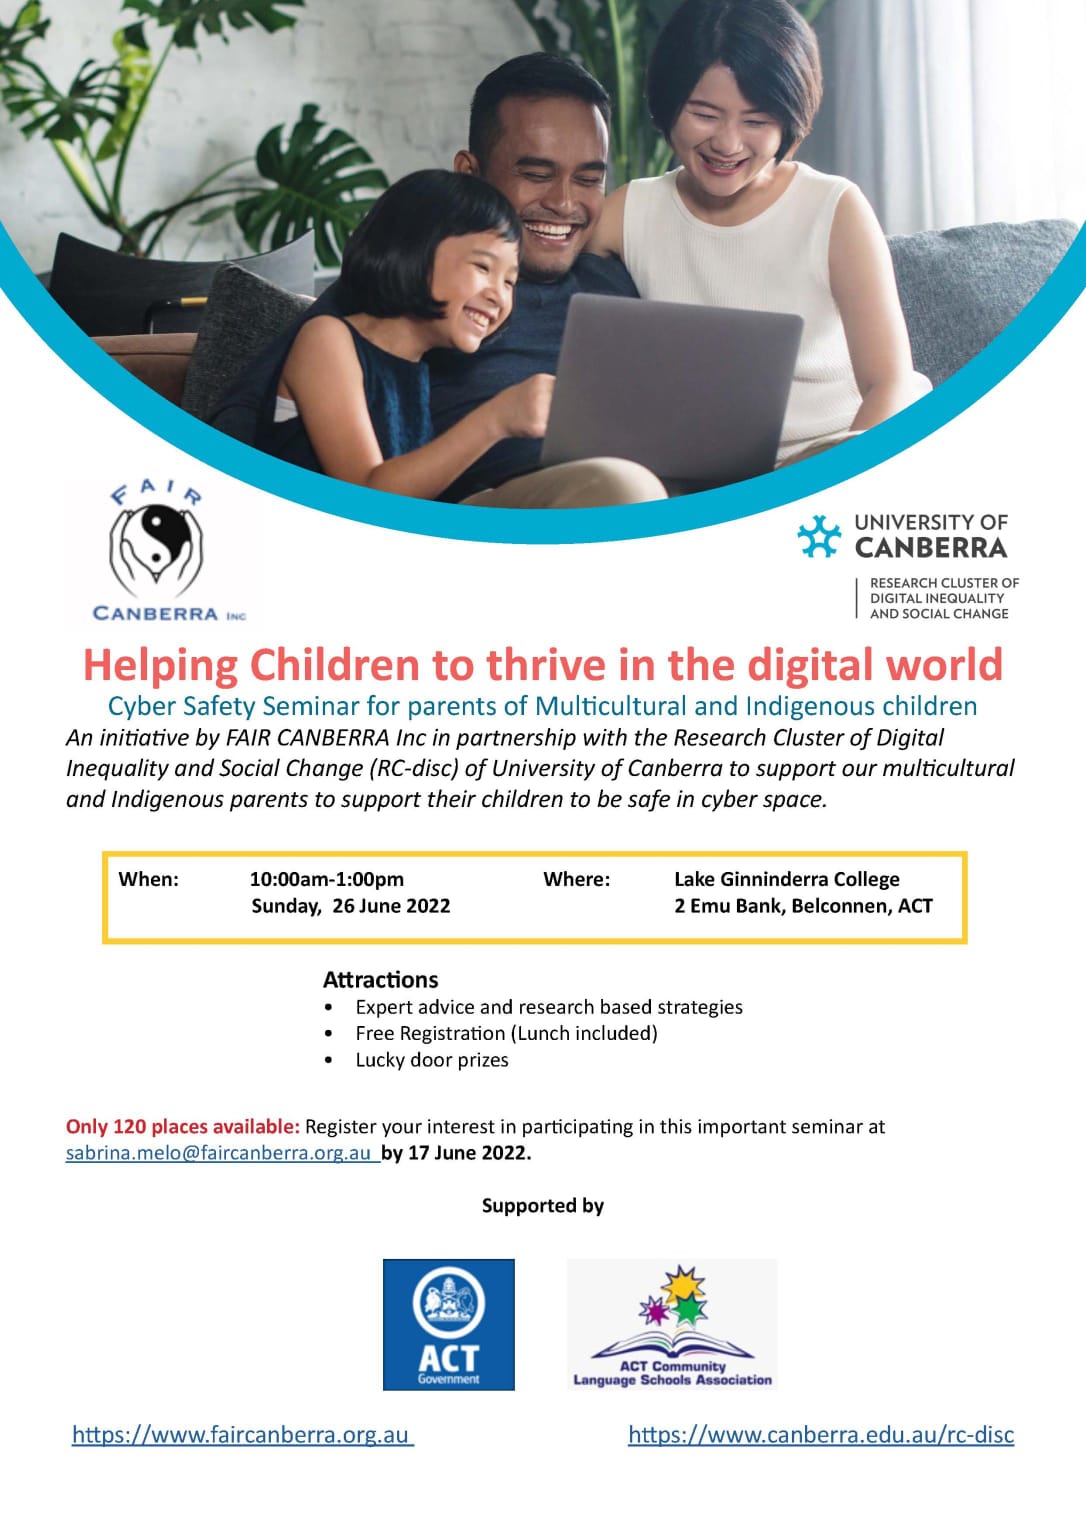 Helping children to thrive in the digital world